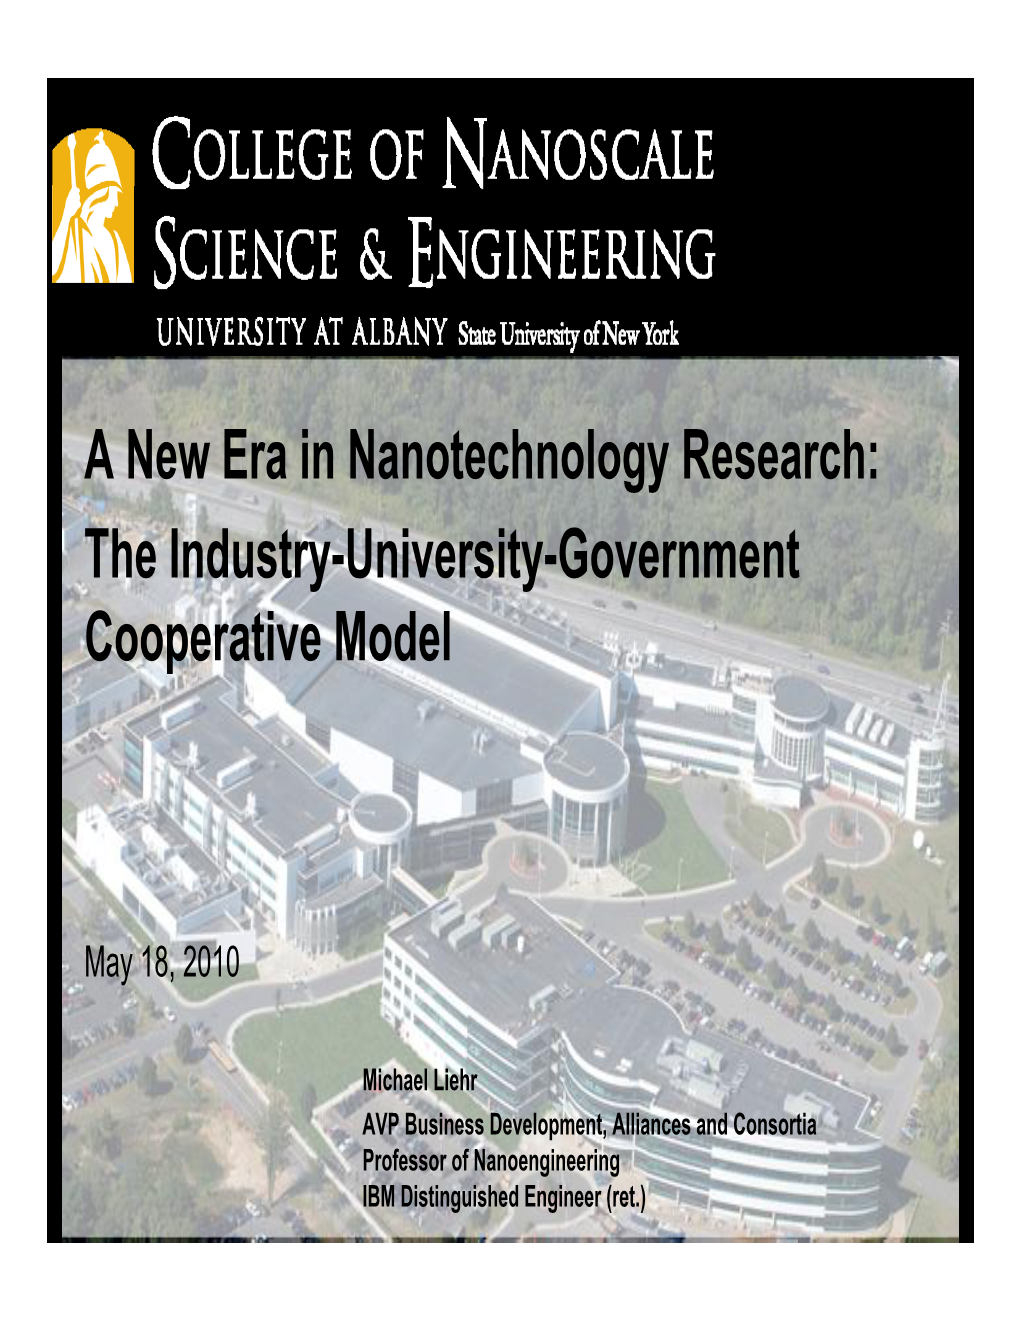 A New Era in Nanotechnology Research: the Industry-University-Government Cooperative Model